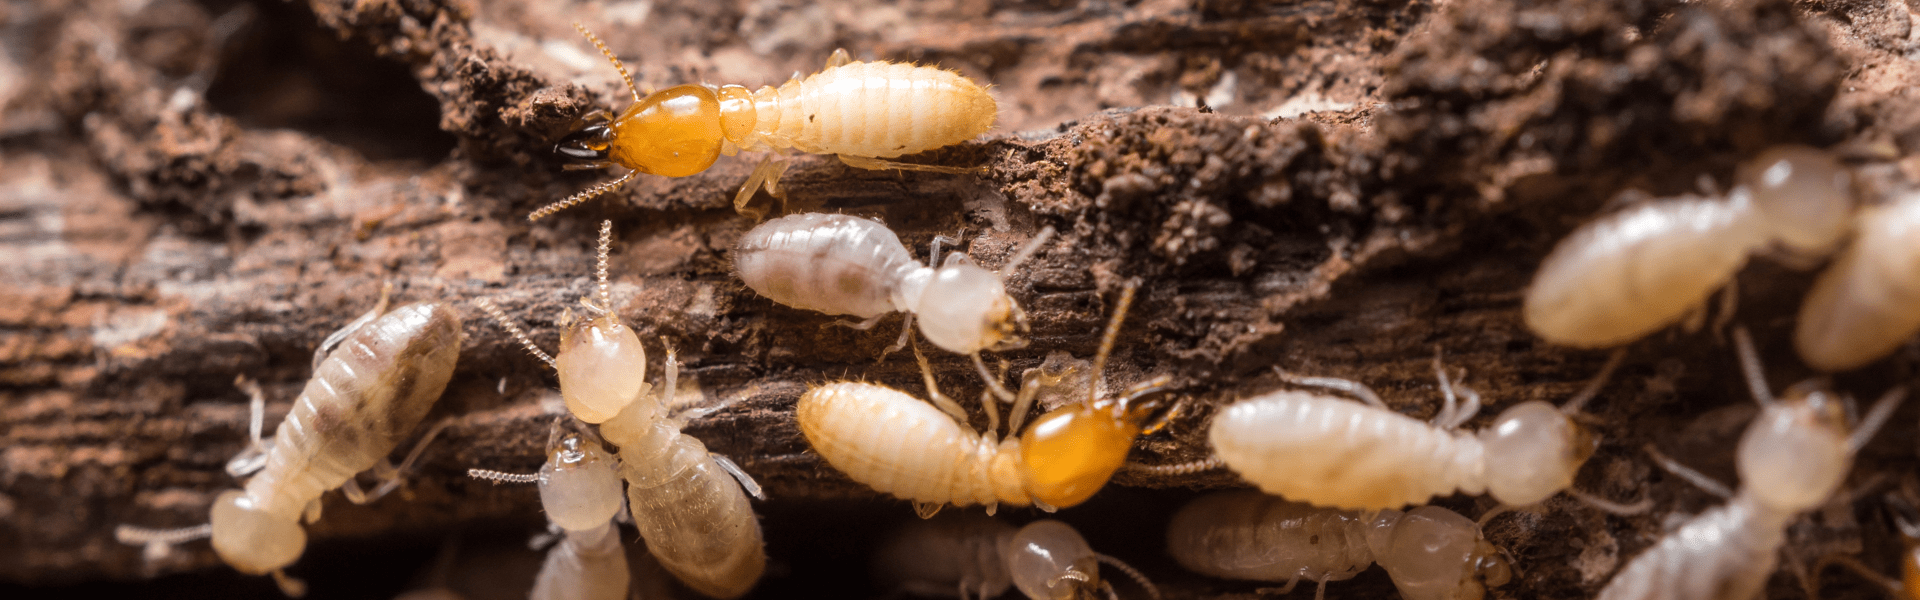 termite workers foraging for food